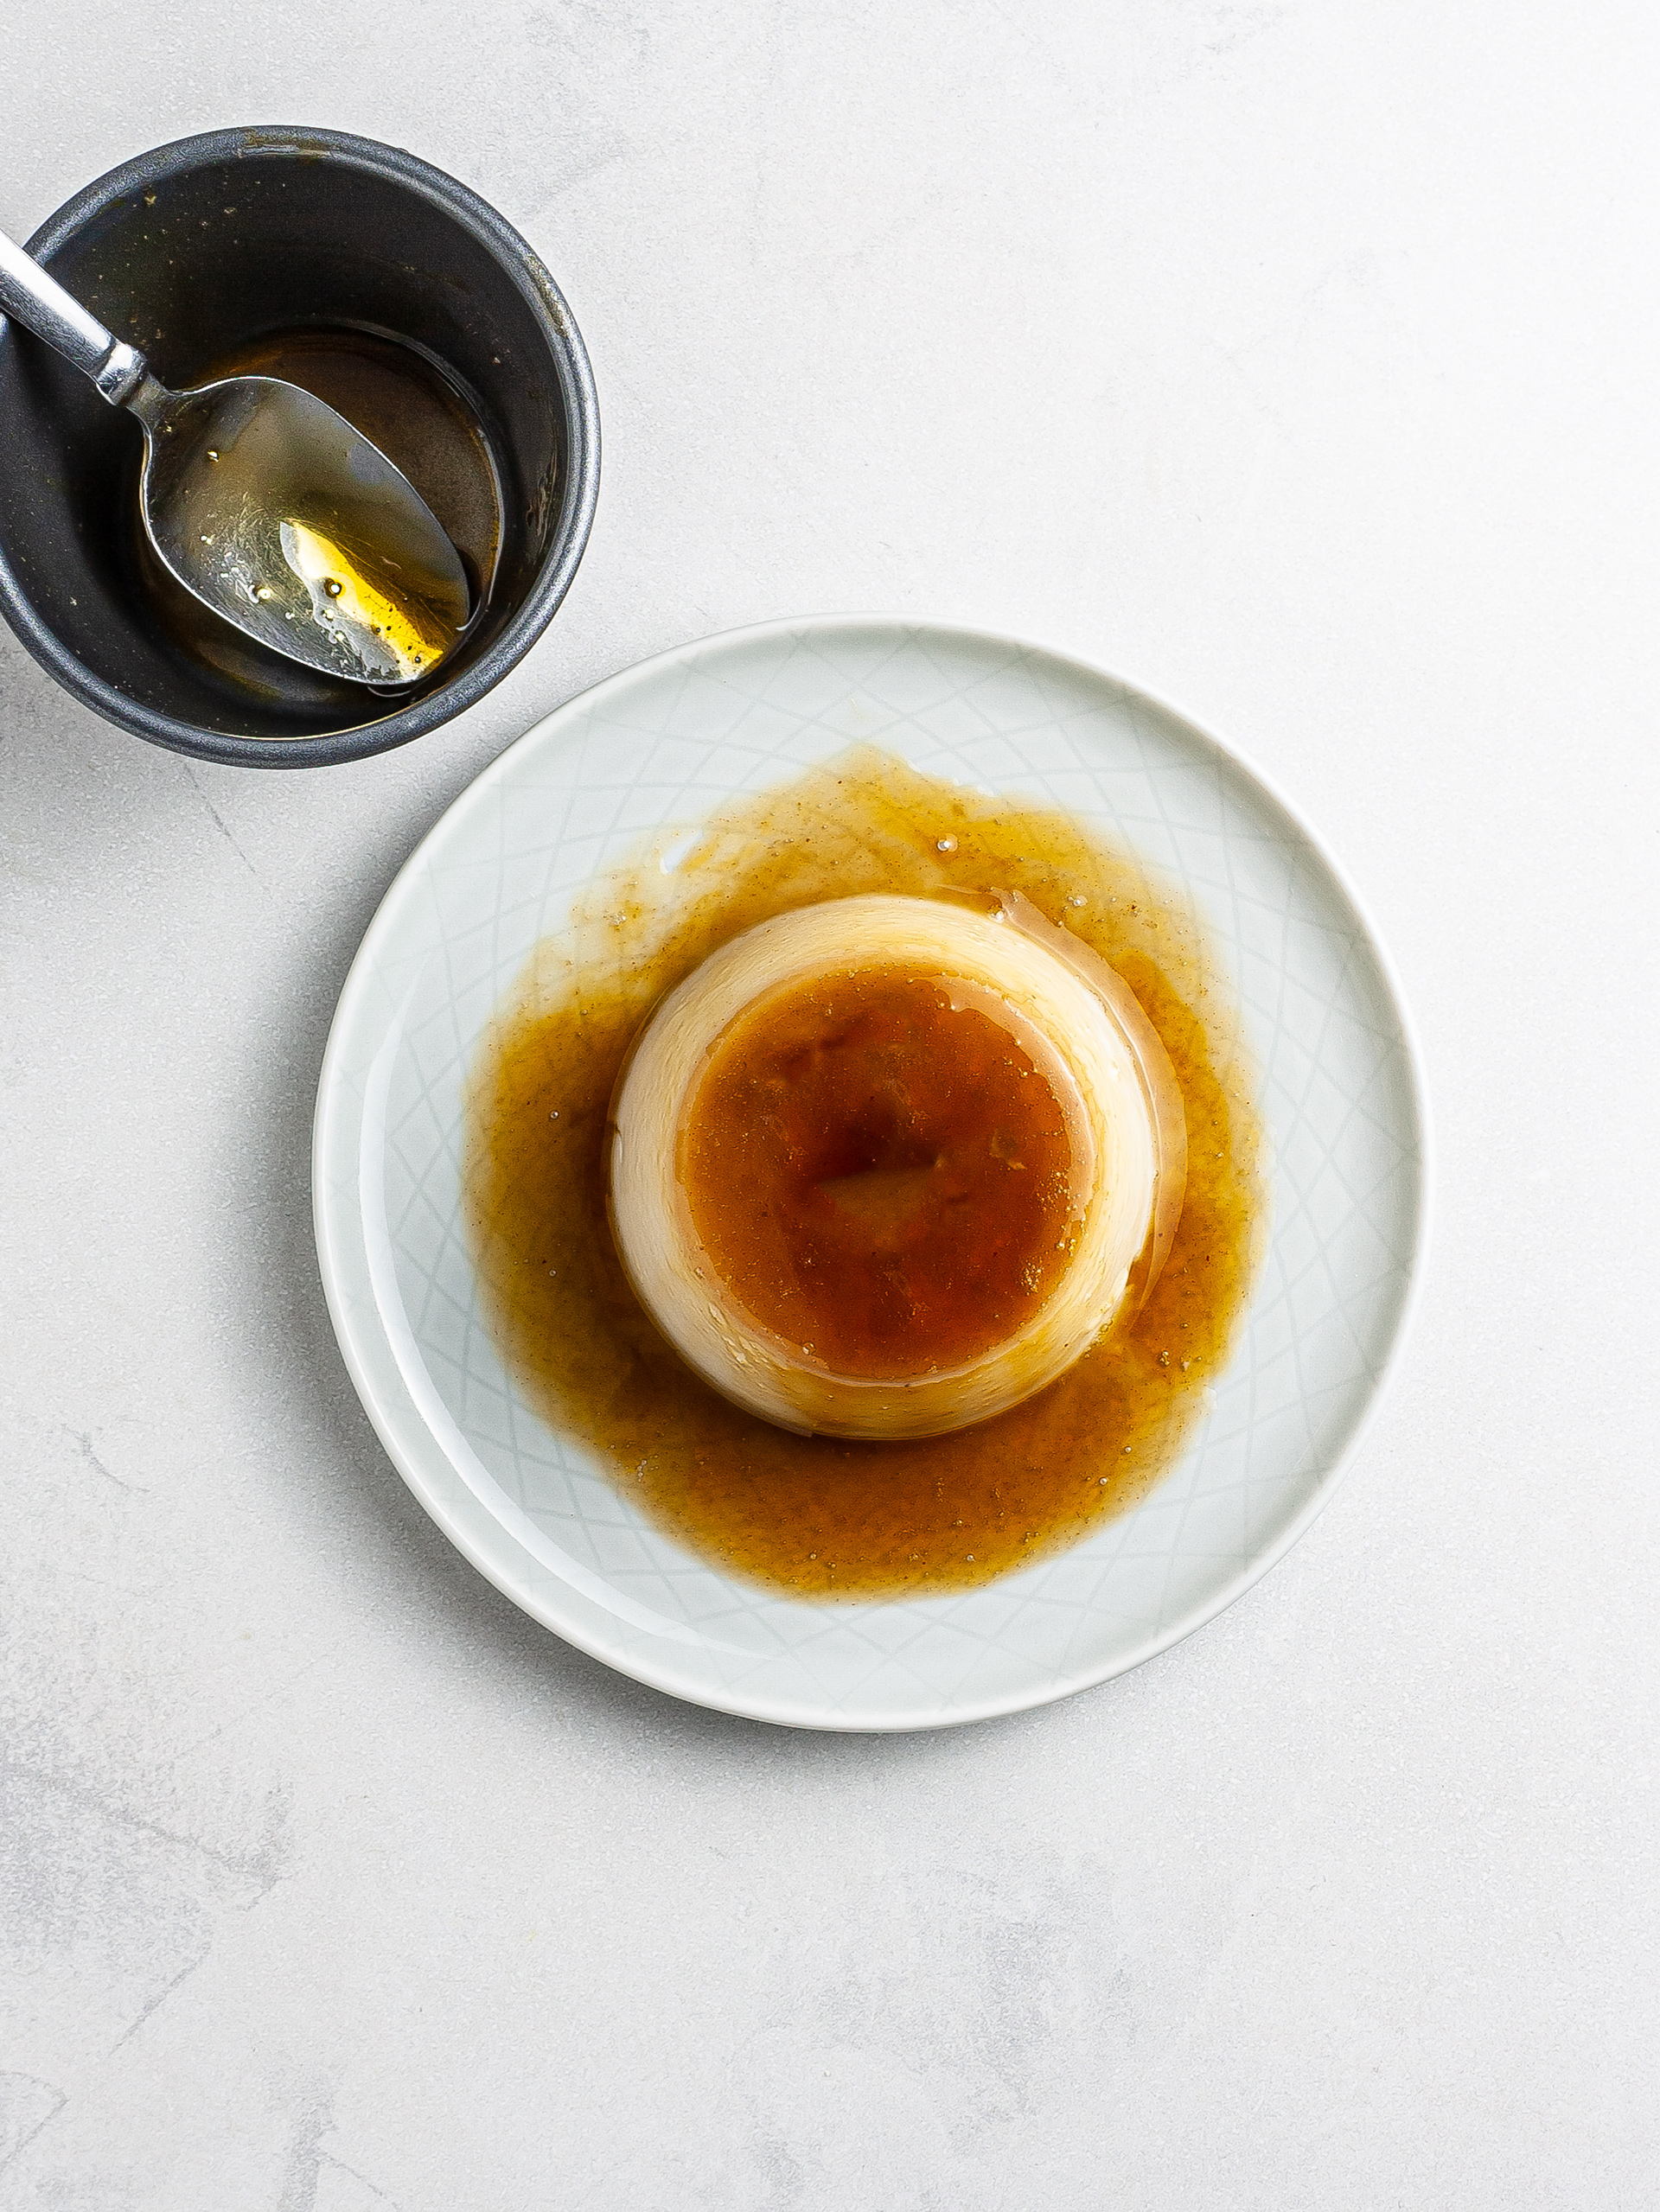 Flipped flan onto a plate